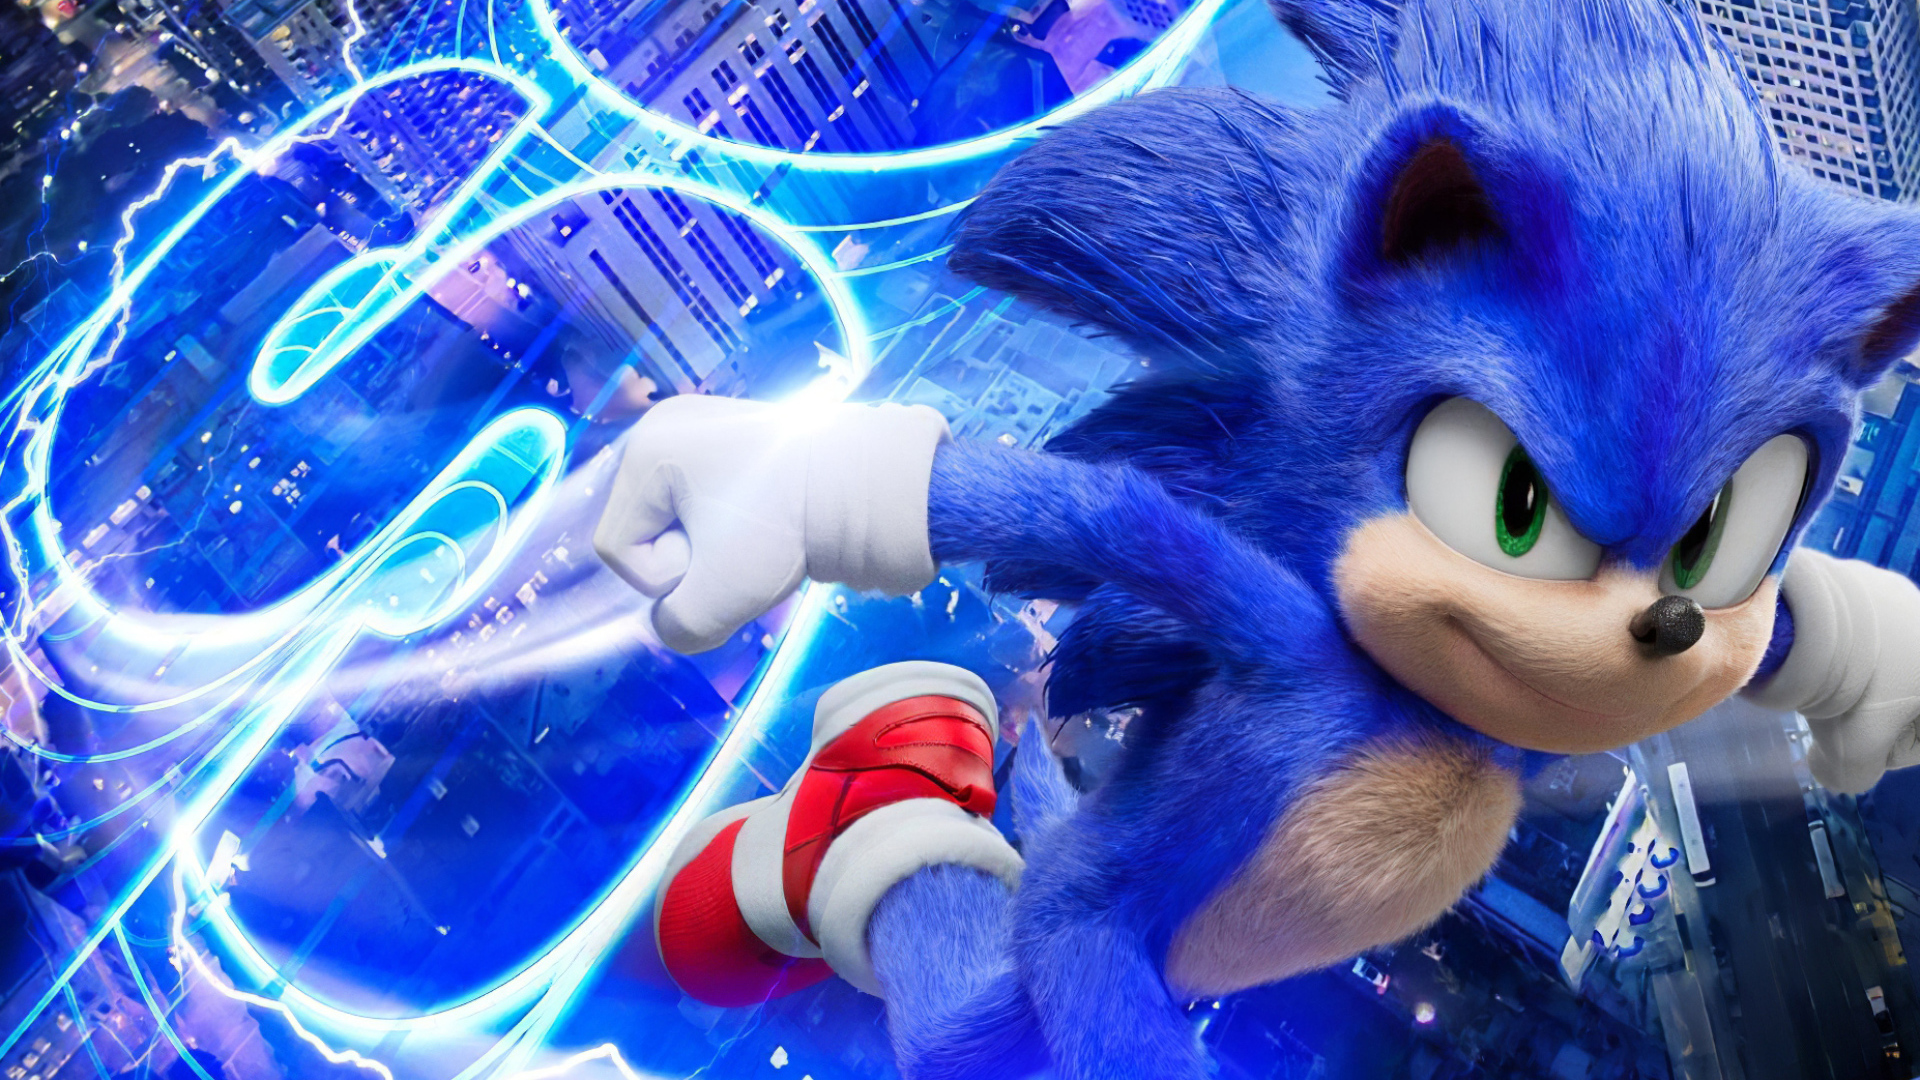 The main character of the movie Sonic in the movie, 2020